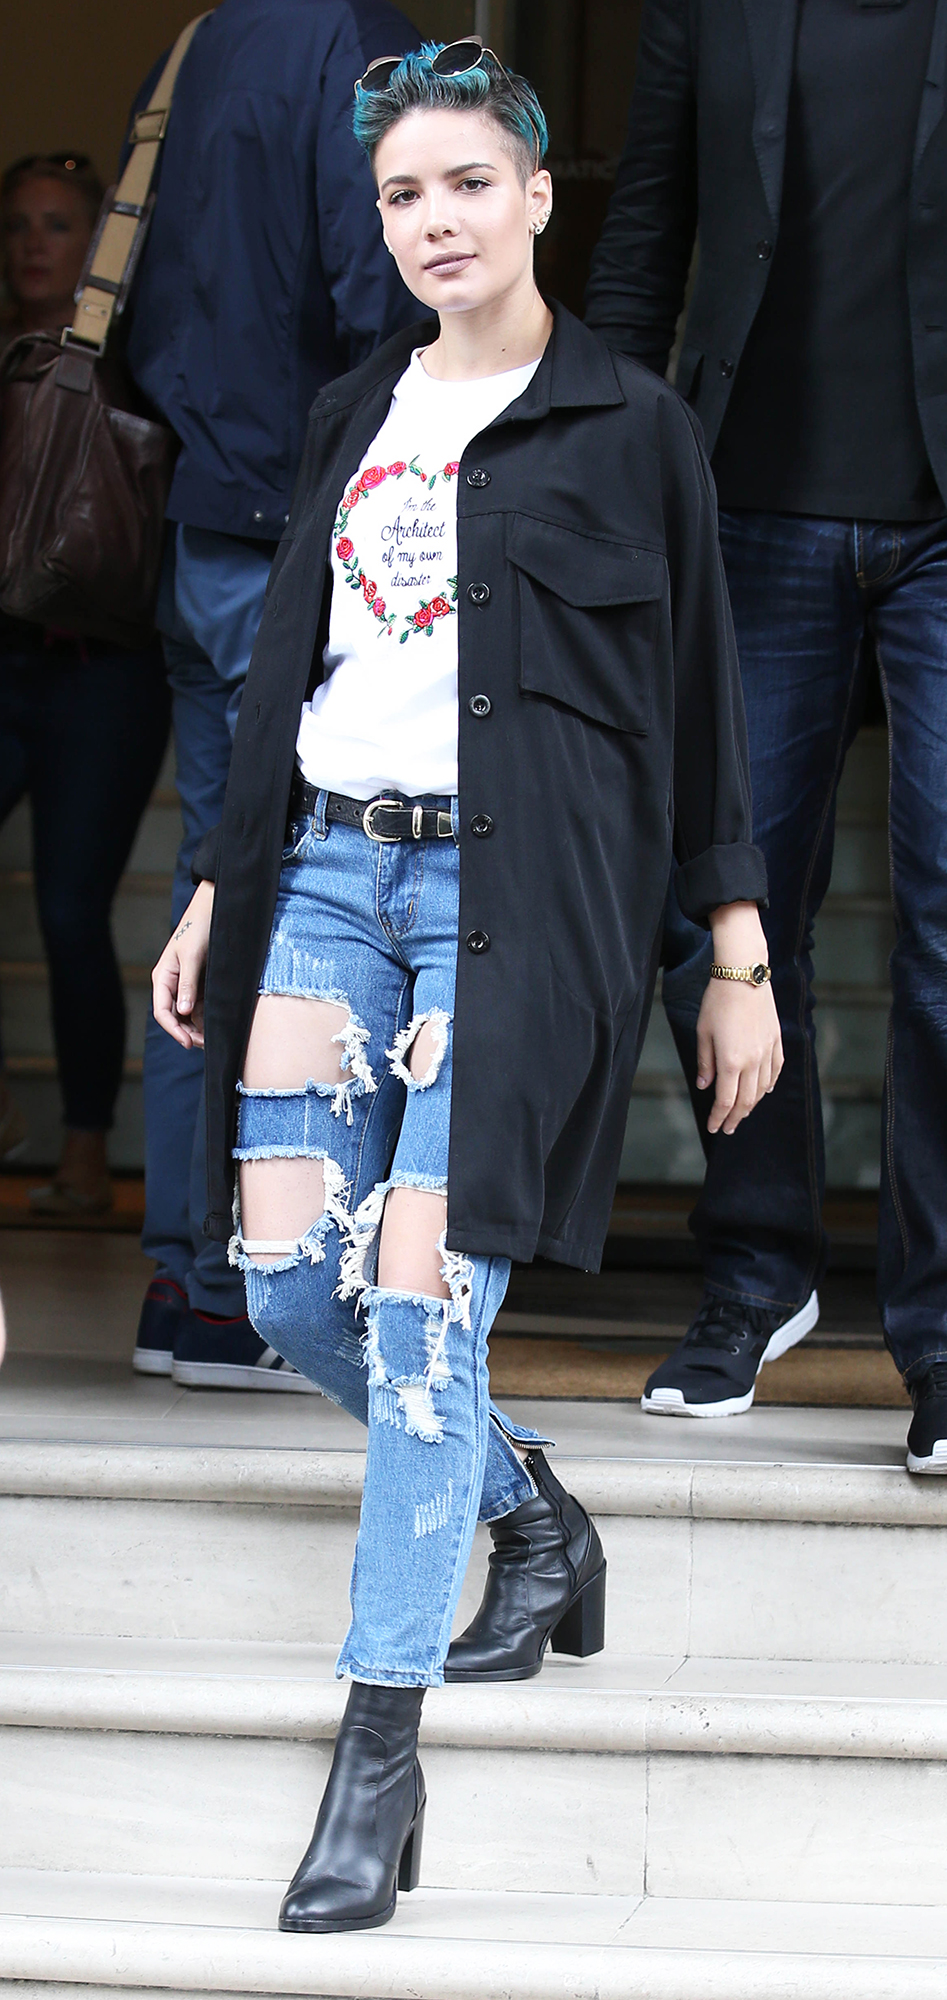 See the Pop Star's Best Outfits